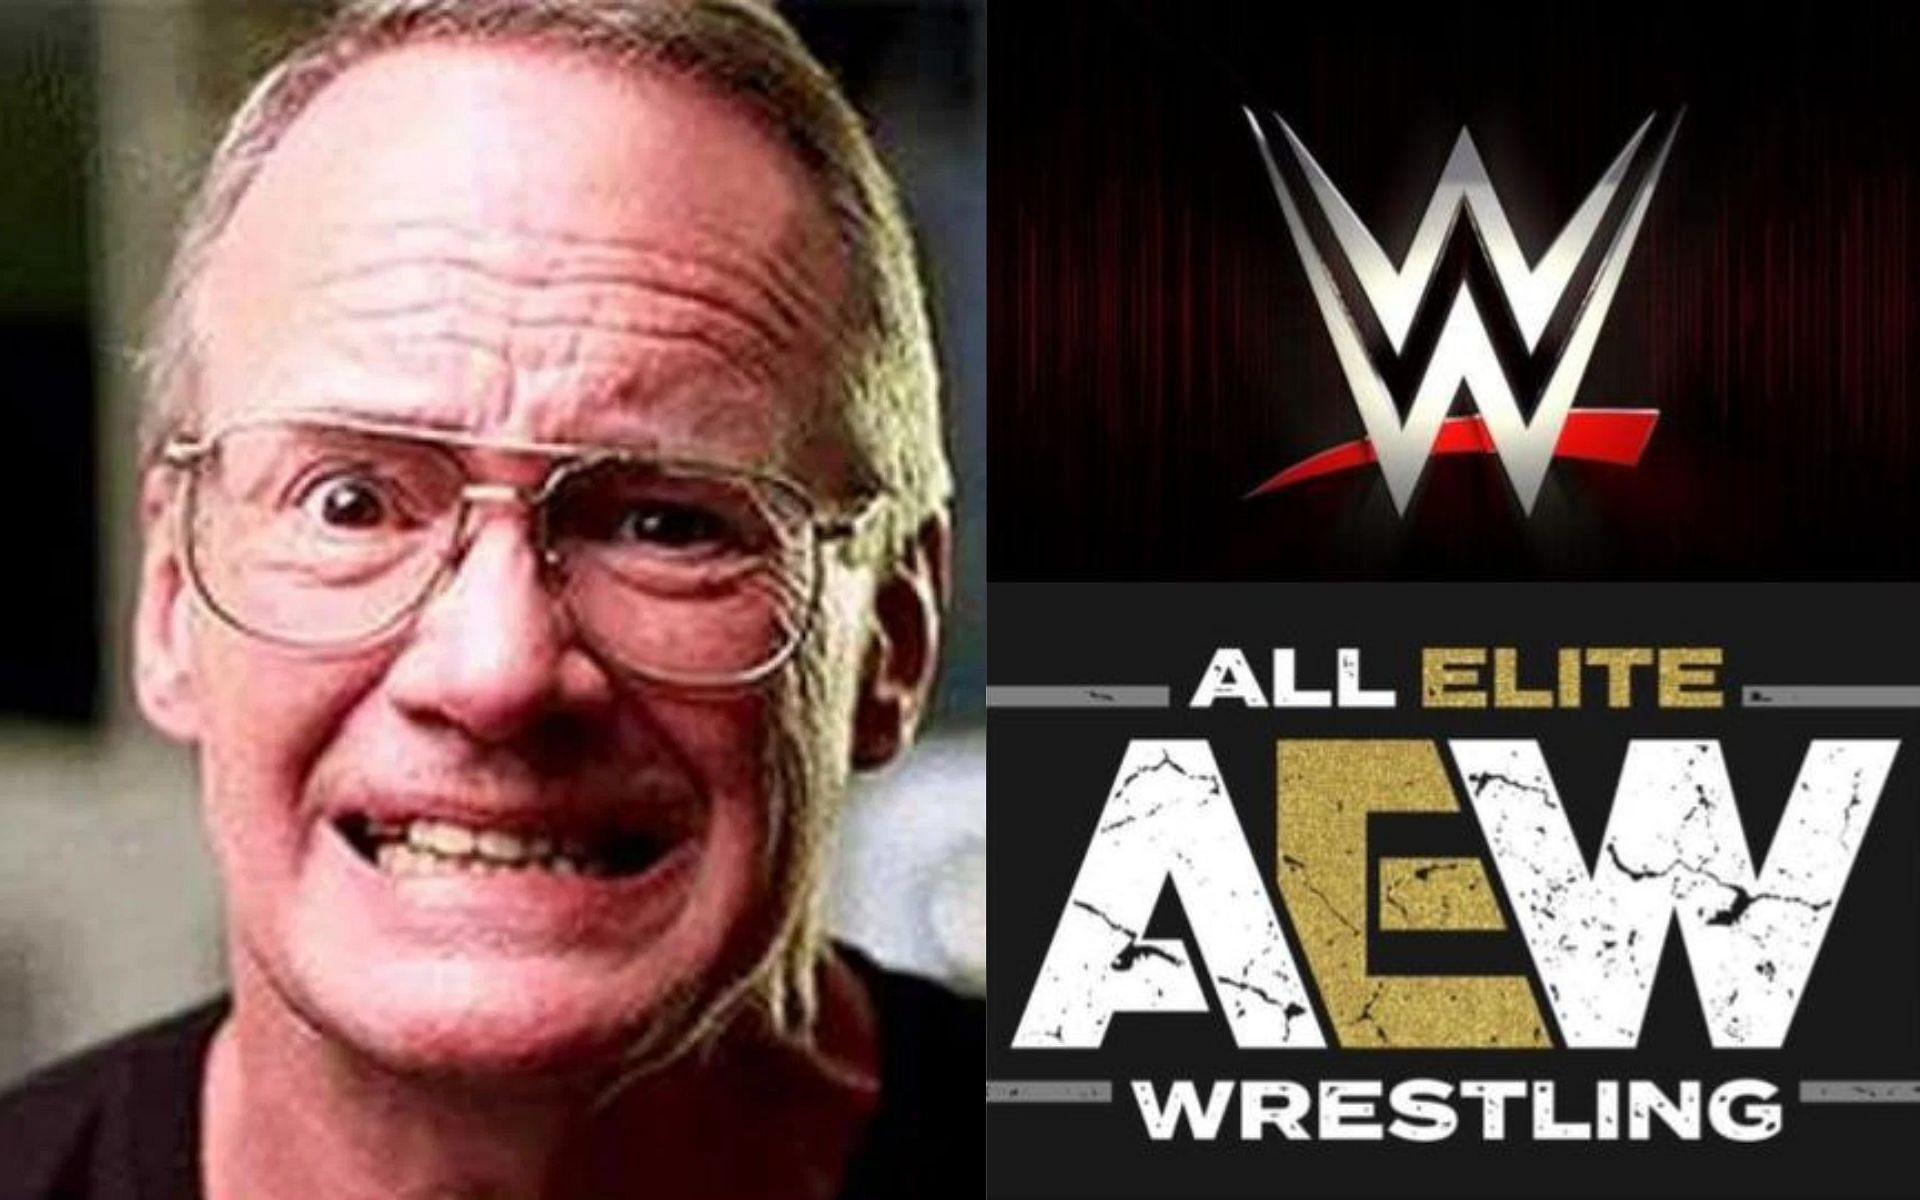 Jim Cornette (left) and AEW and WWE logos (right).